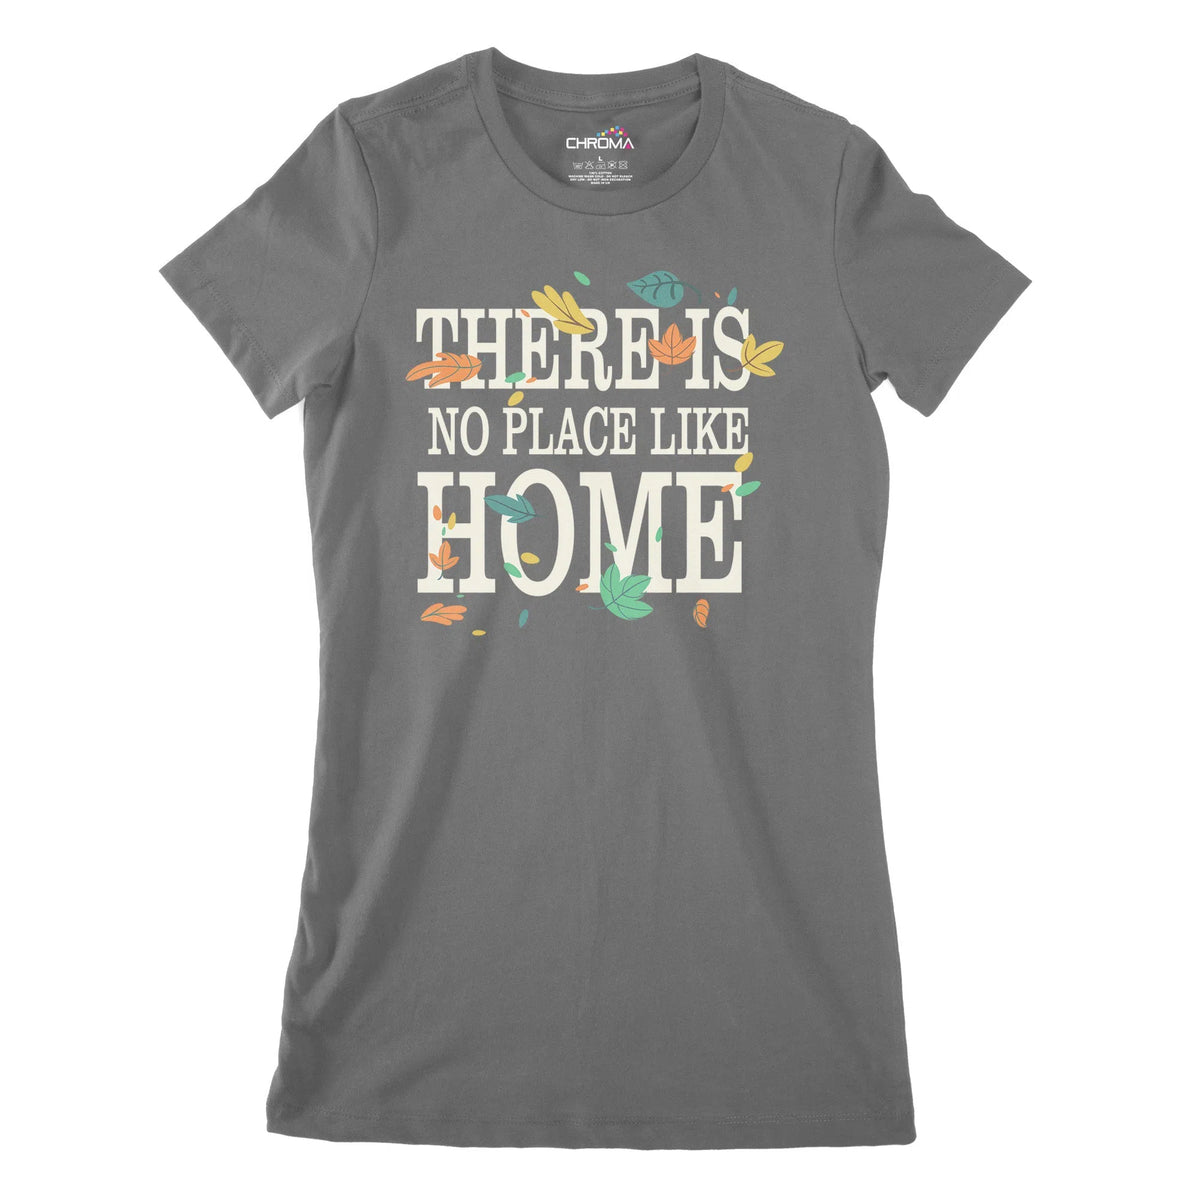 No Place Like Home Women's Classic Fitted T-Shirt Chroma Clothing